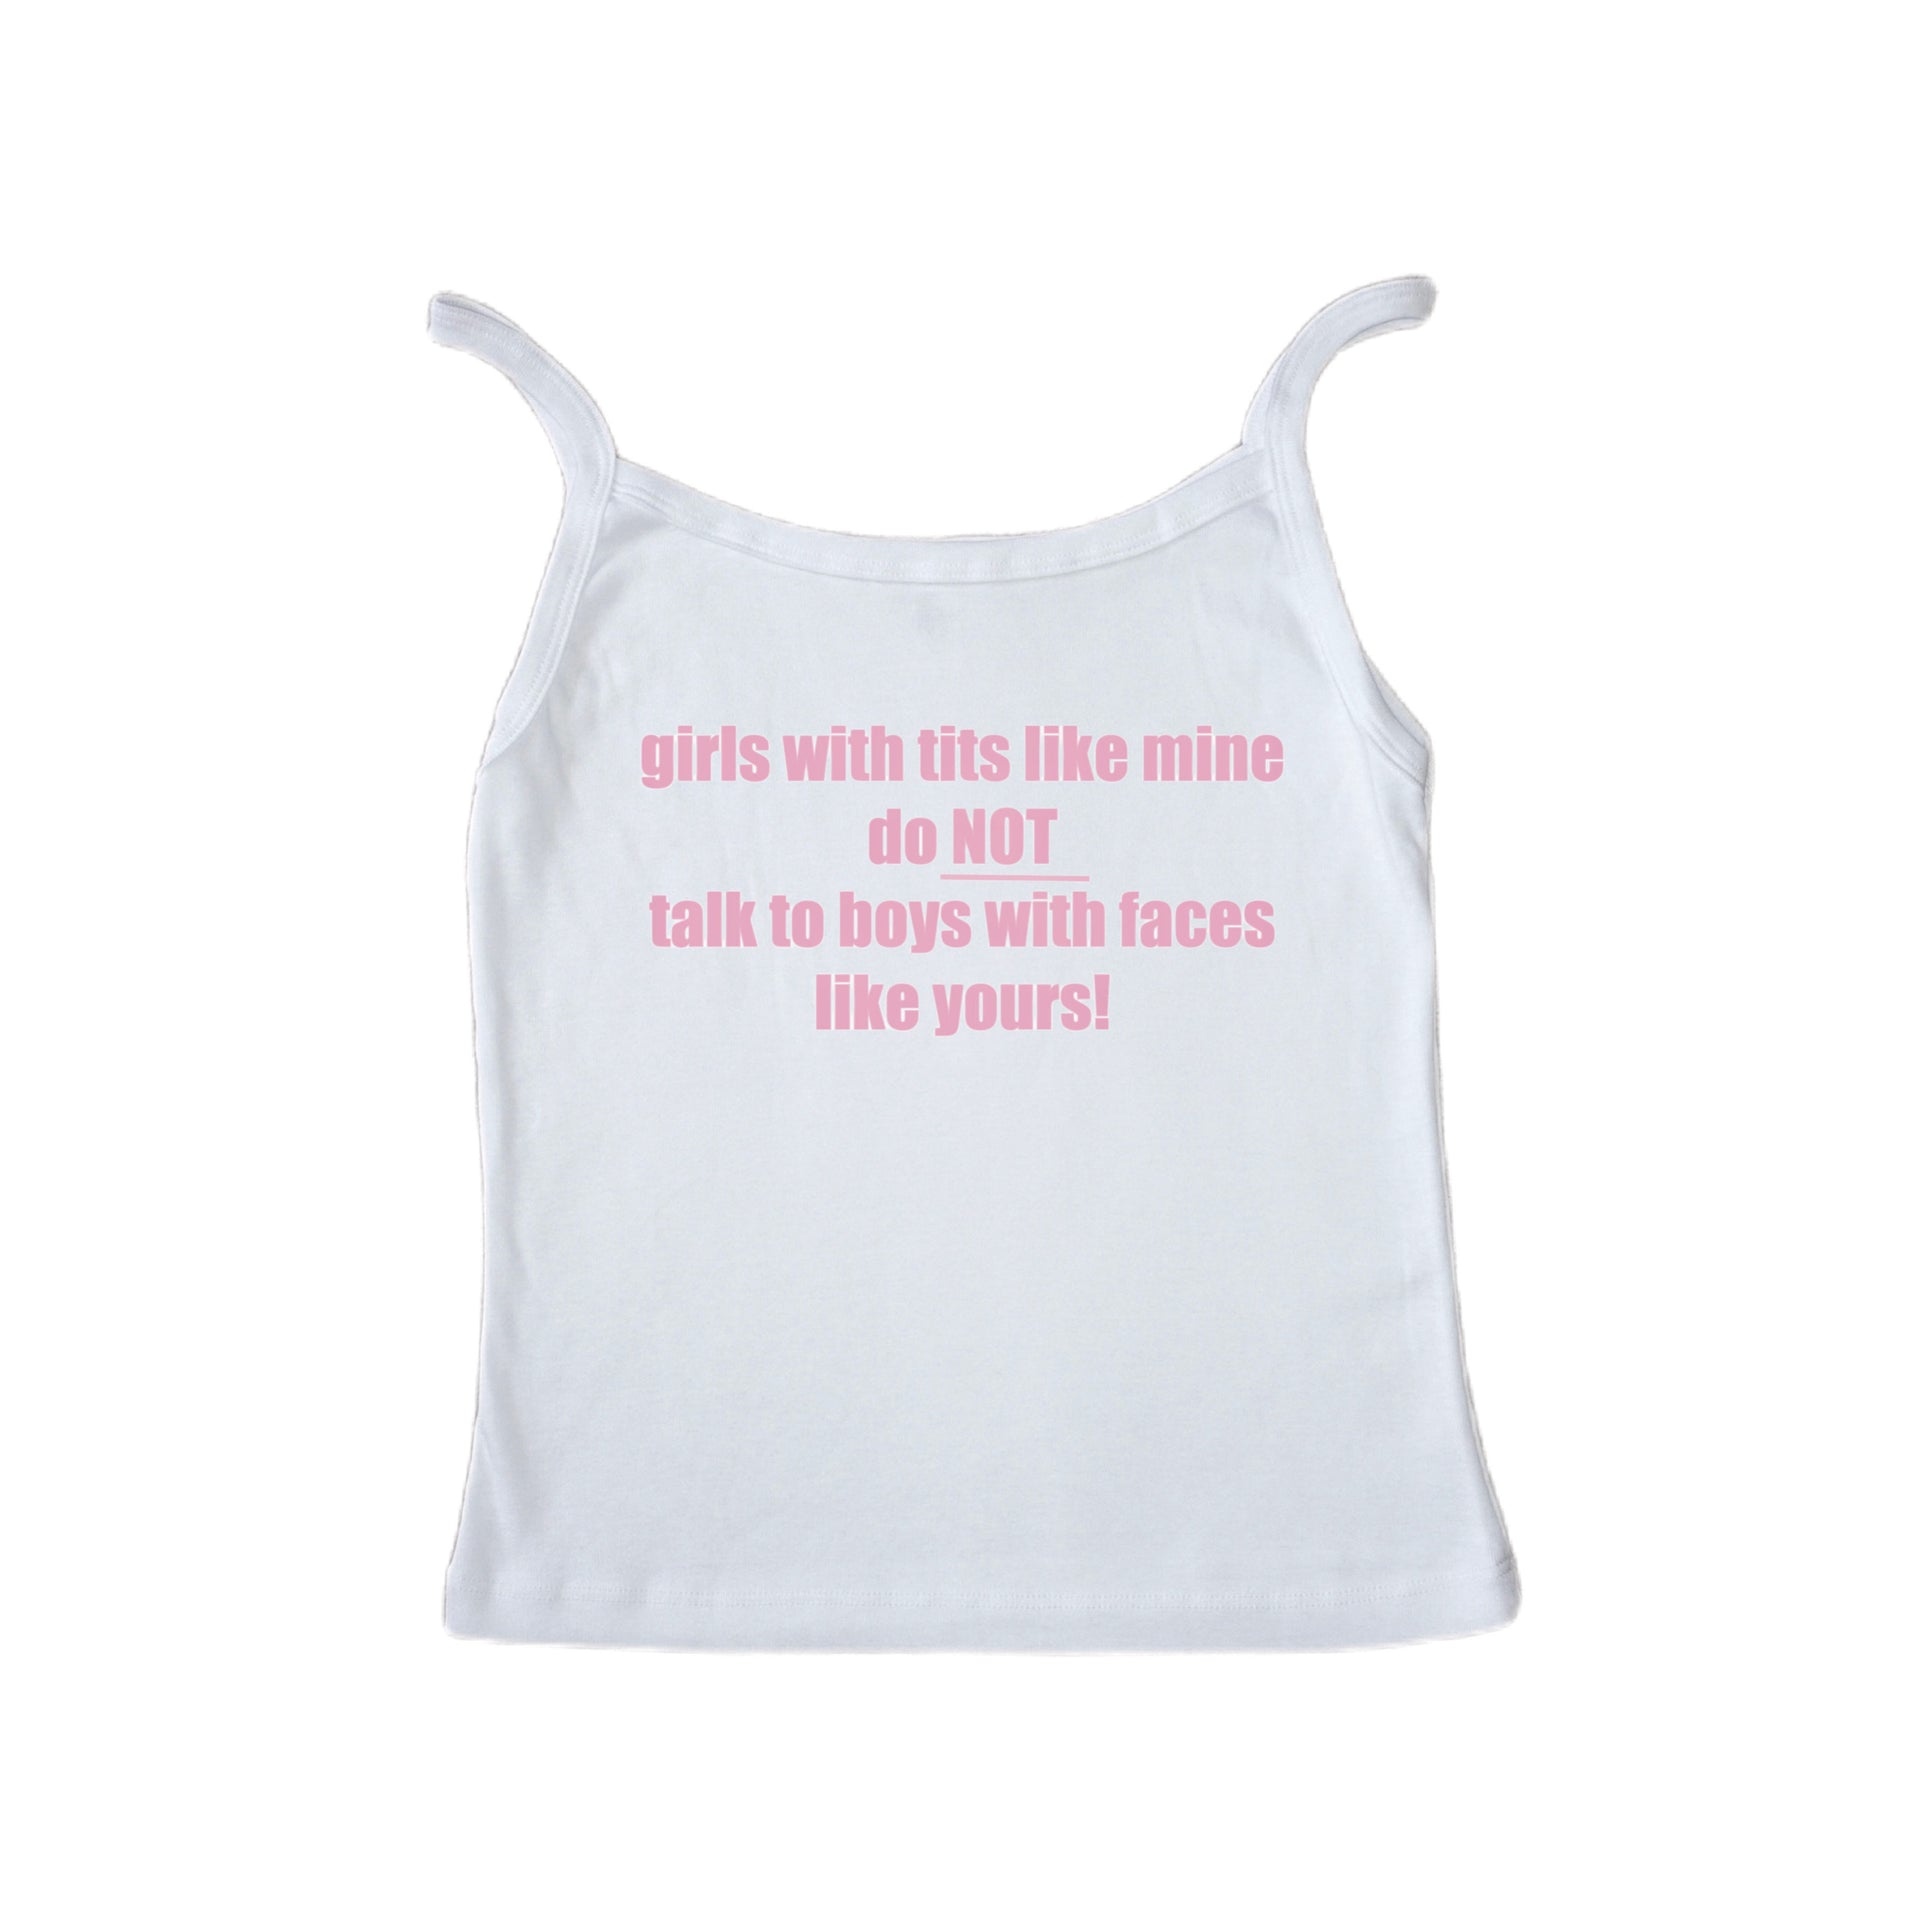 Girls with tits like mine do not talk to boys with faces like yours! tank top